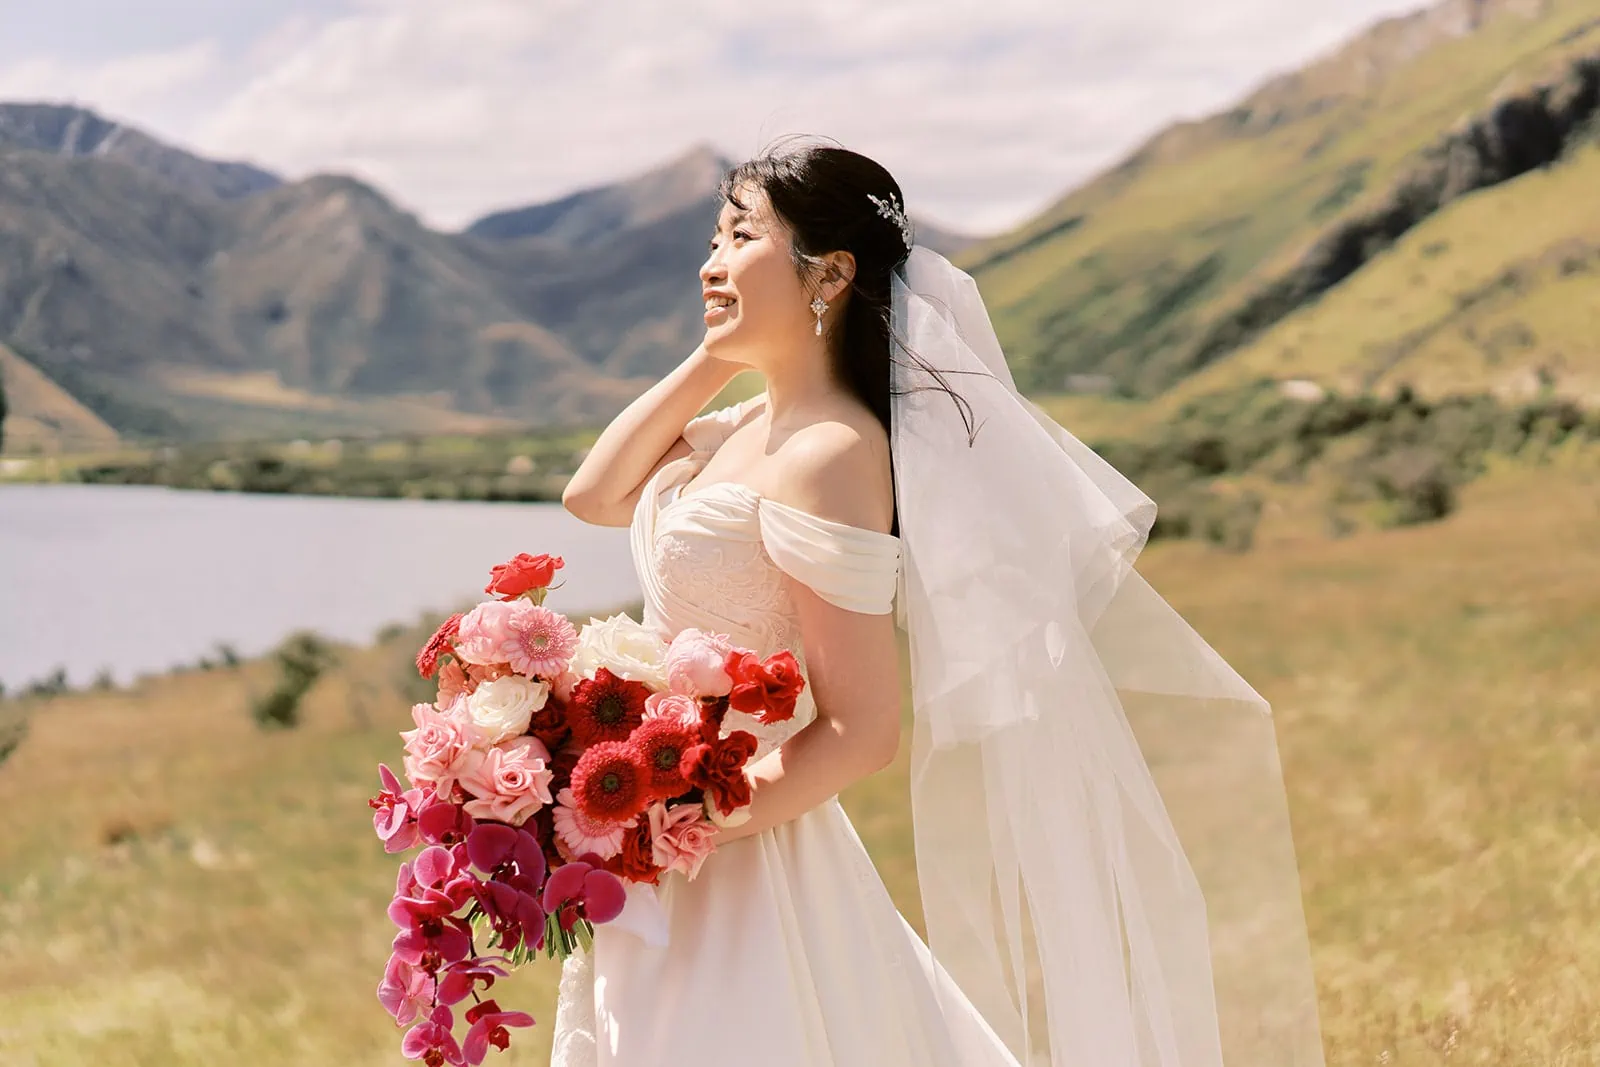 Queenstown Elopement Heli Wedding Photographer クイーンズタウン結婚式 | A bride gracefully poses with her bouquet during a pre-wedding photoshoot in a picturesque field with majestic mountains as the stunning backdrop.